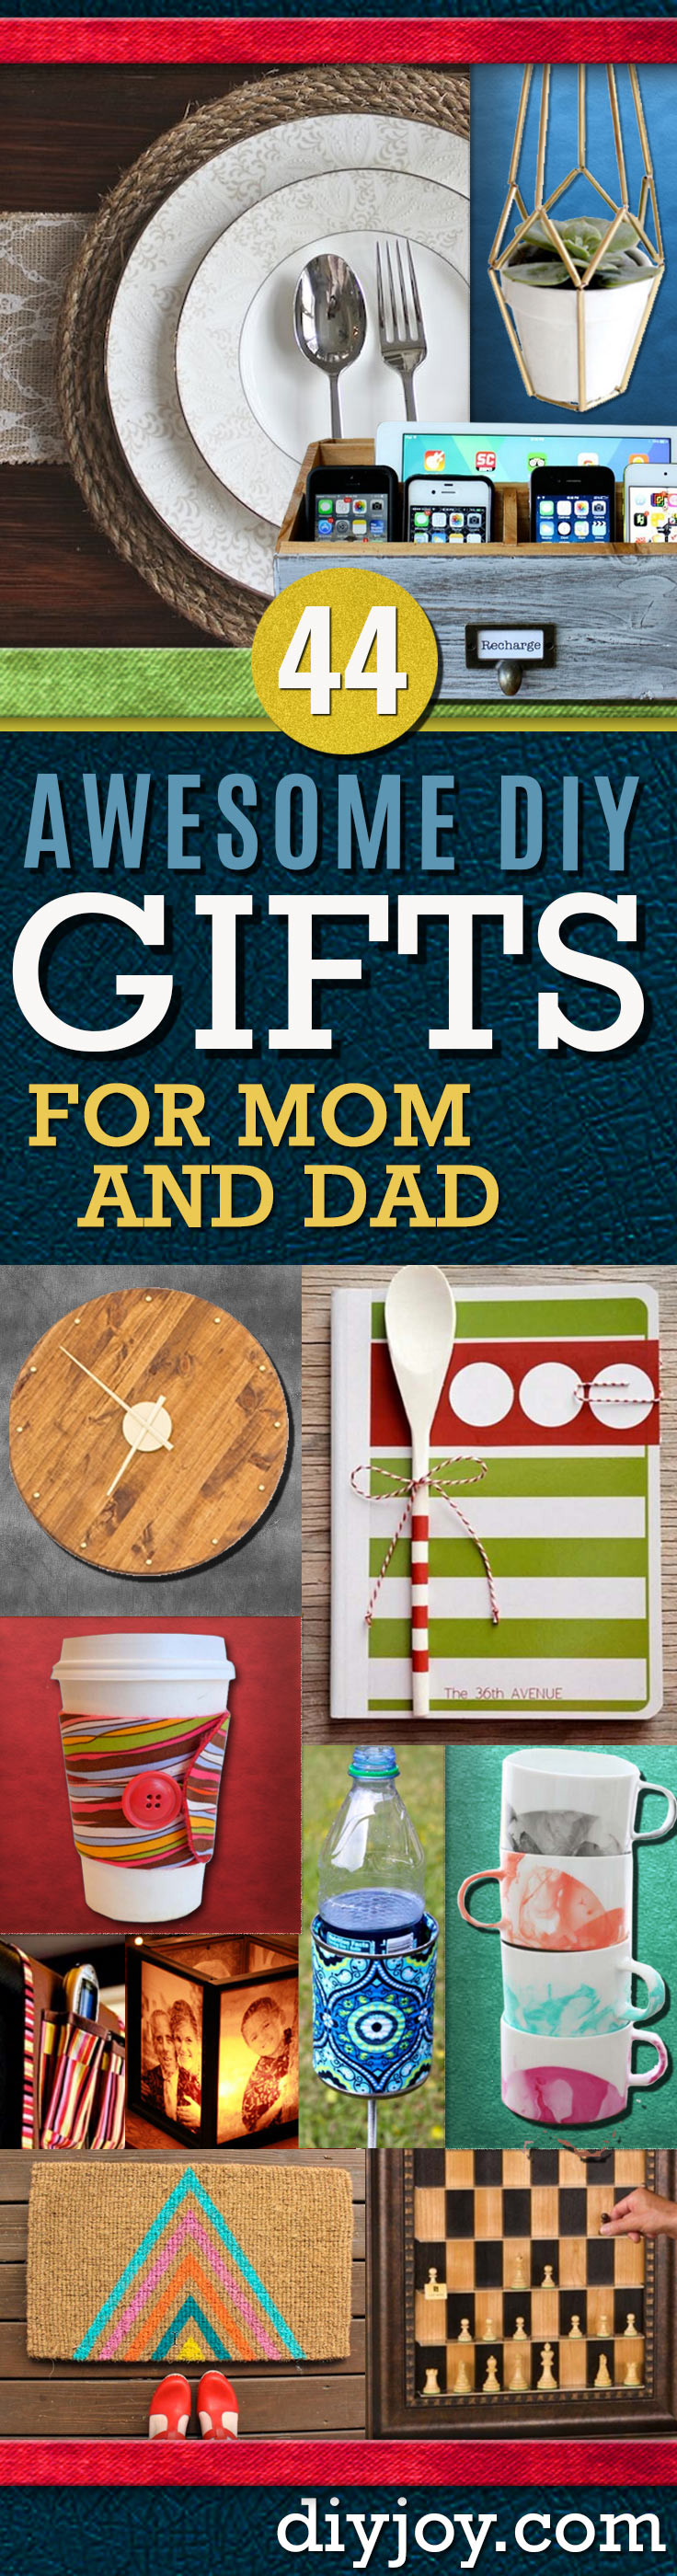 Christmas Gift Ideas For Moms
 Awesome DIY Gift Ideas Mom and Dad Will Love